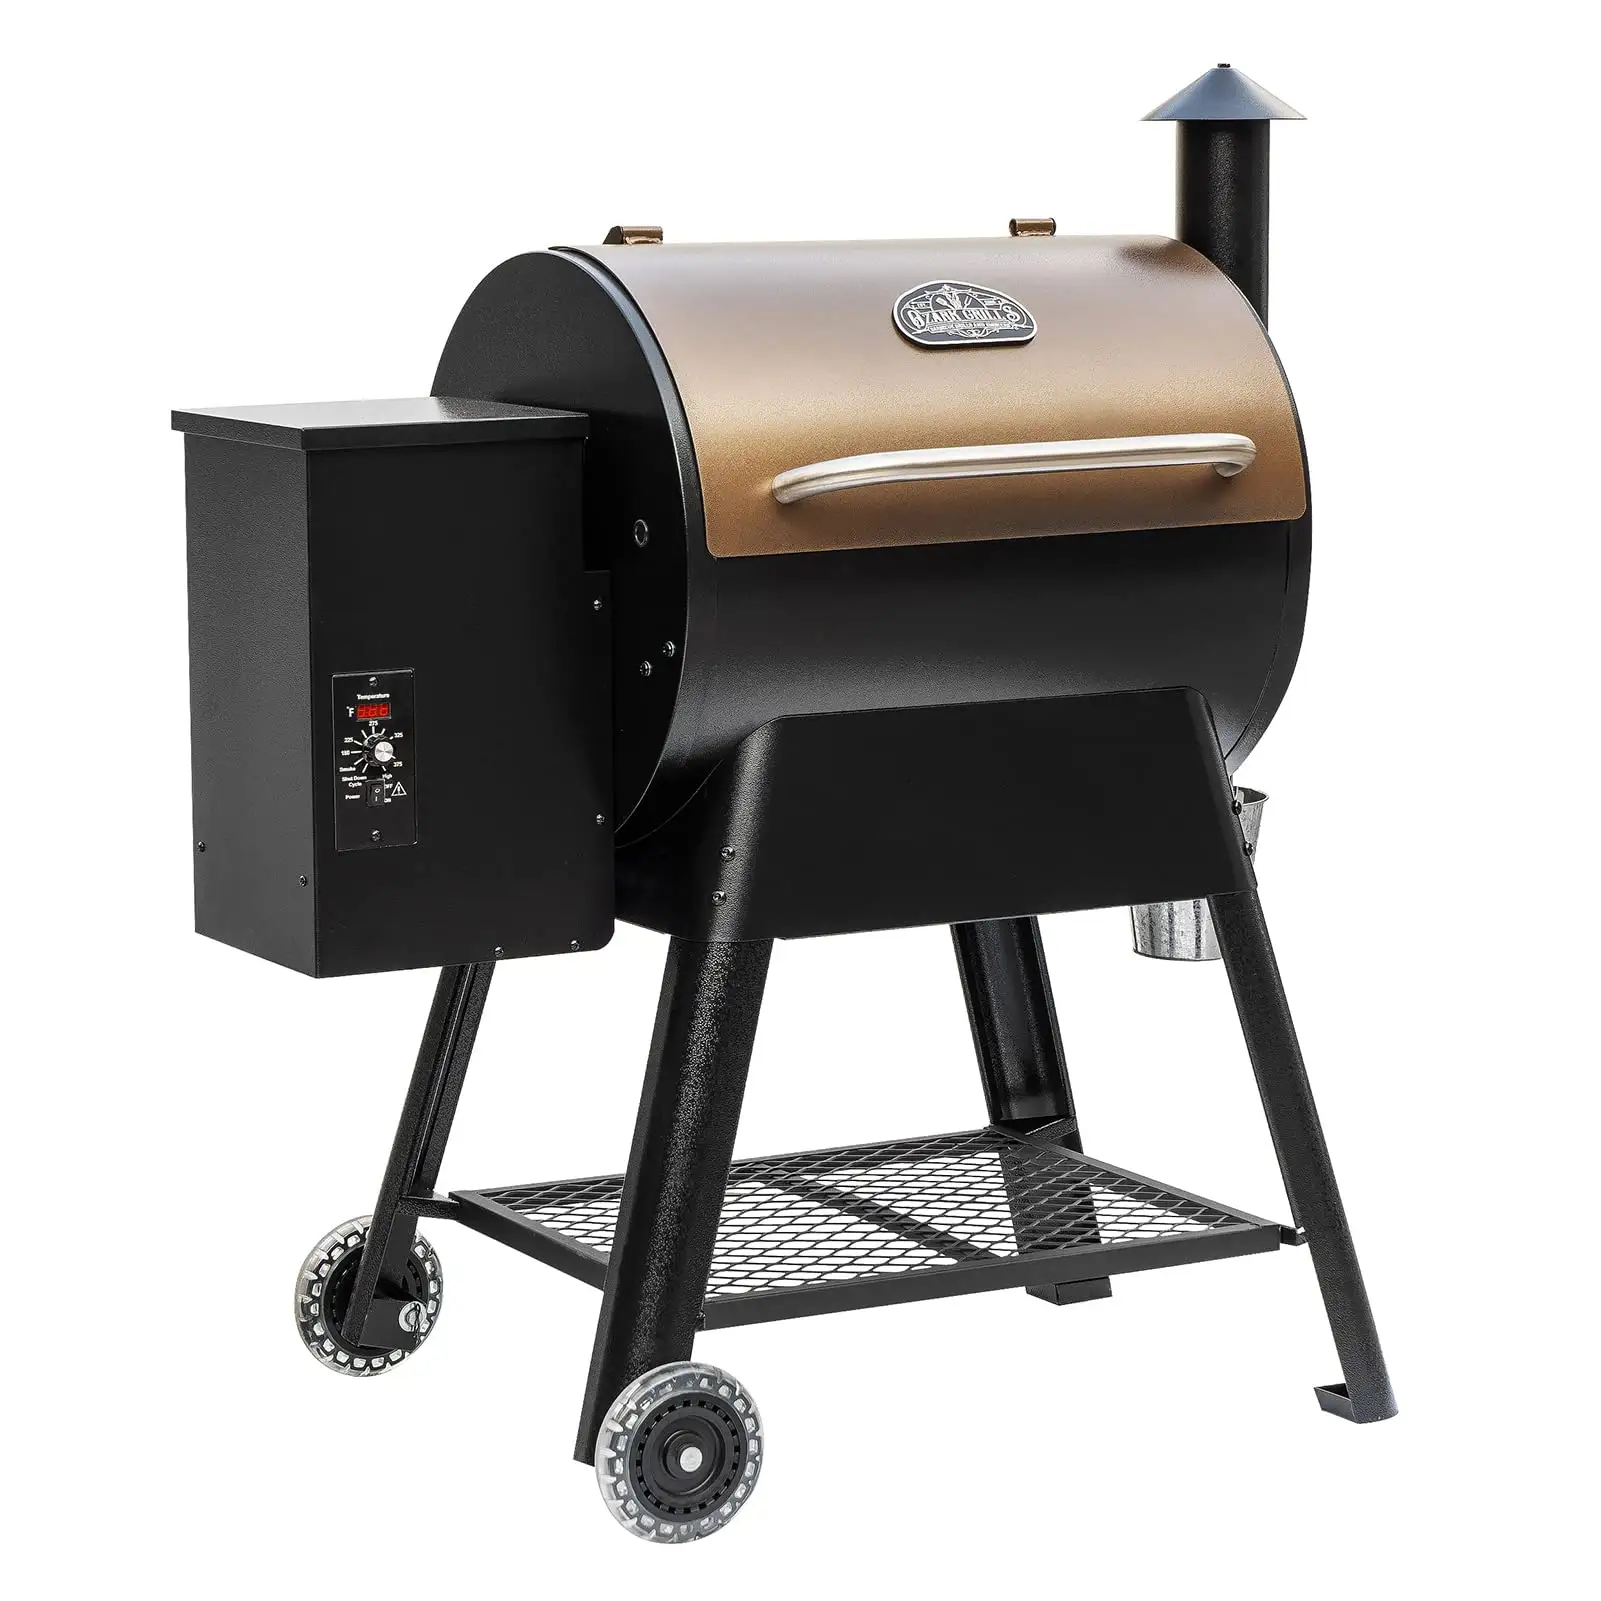 High-quality 2022 Trendy Updated pit boss pellet grill from traeger pellet grill factory Outdoor Smokers BBQ